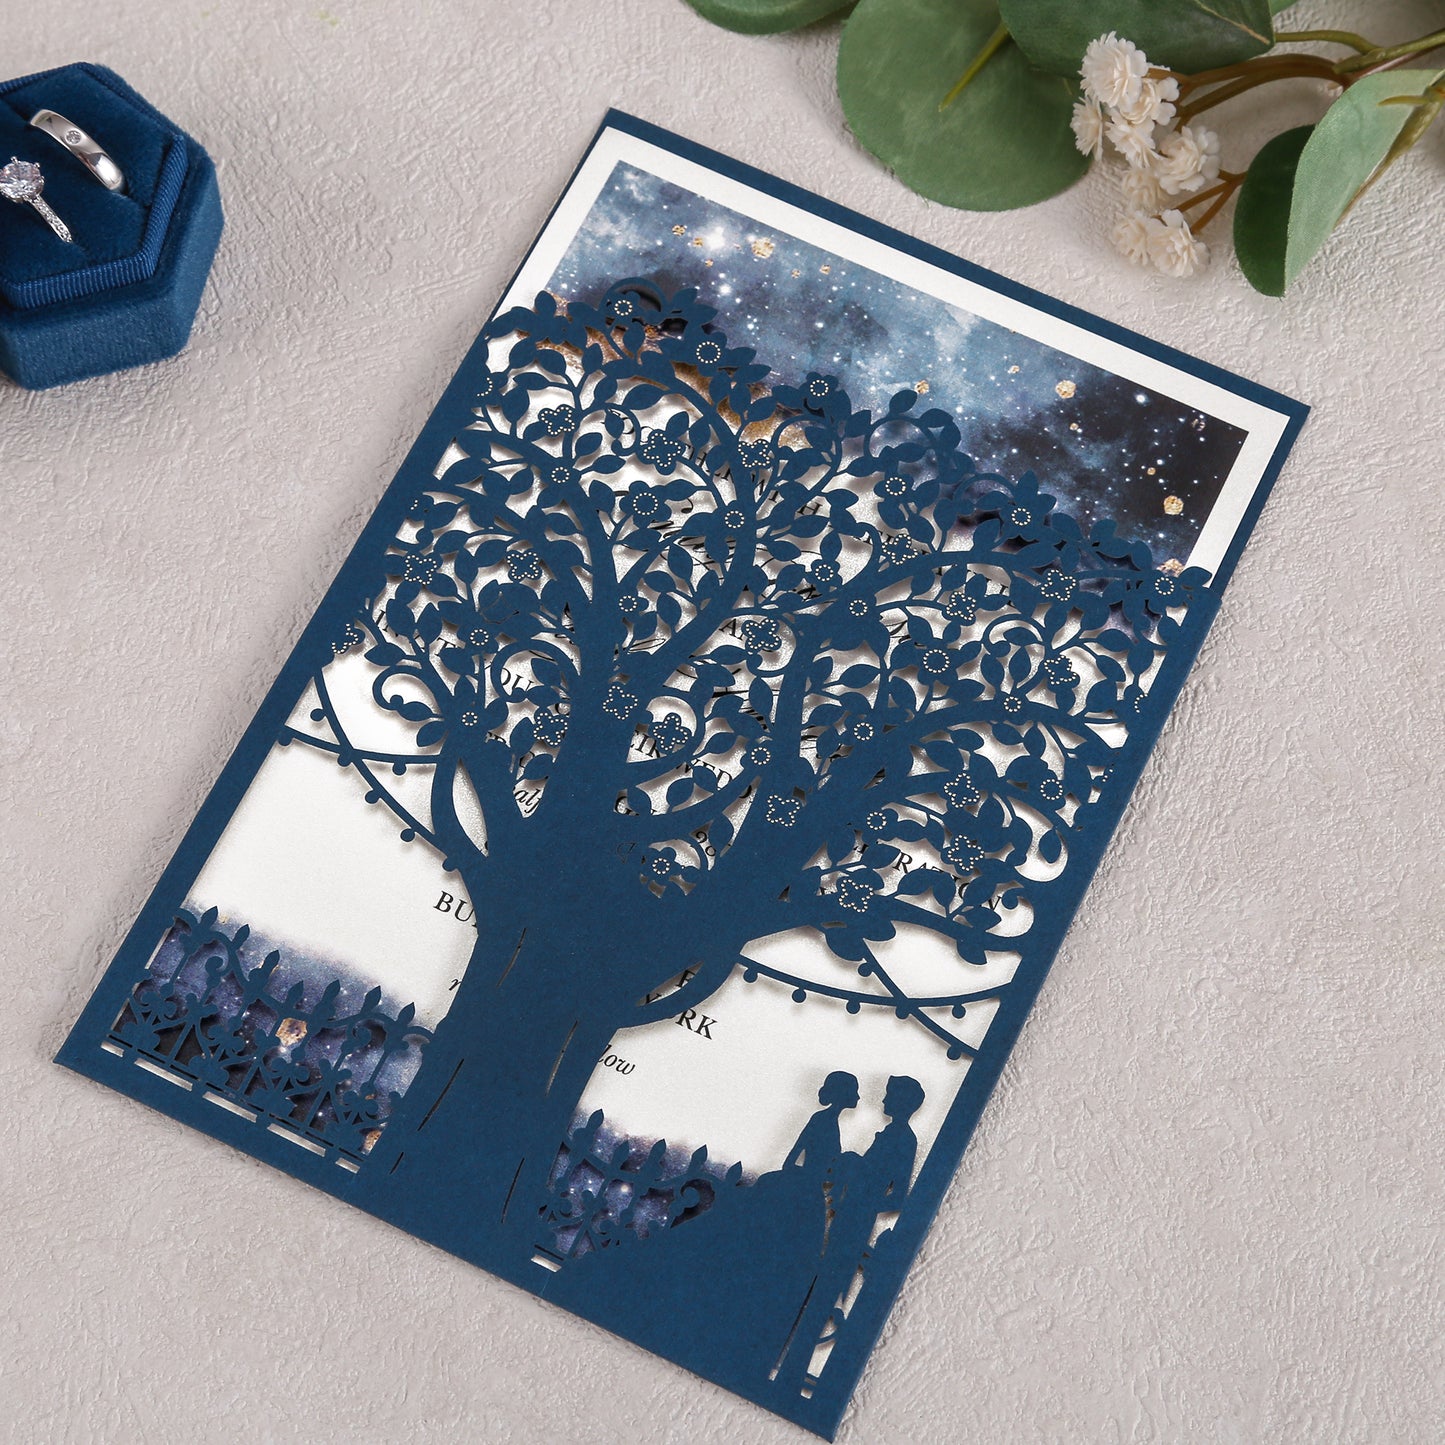 Laser Cut Wedding Invitations with Envelopes Navy Blue, Personalized Pearlized inserts Invitation Cards for Wedding, Invitations with Envelopes